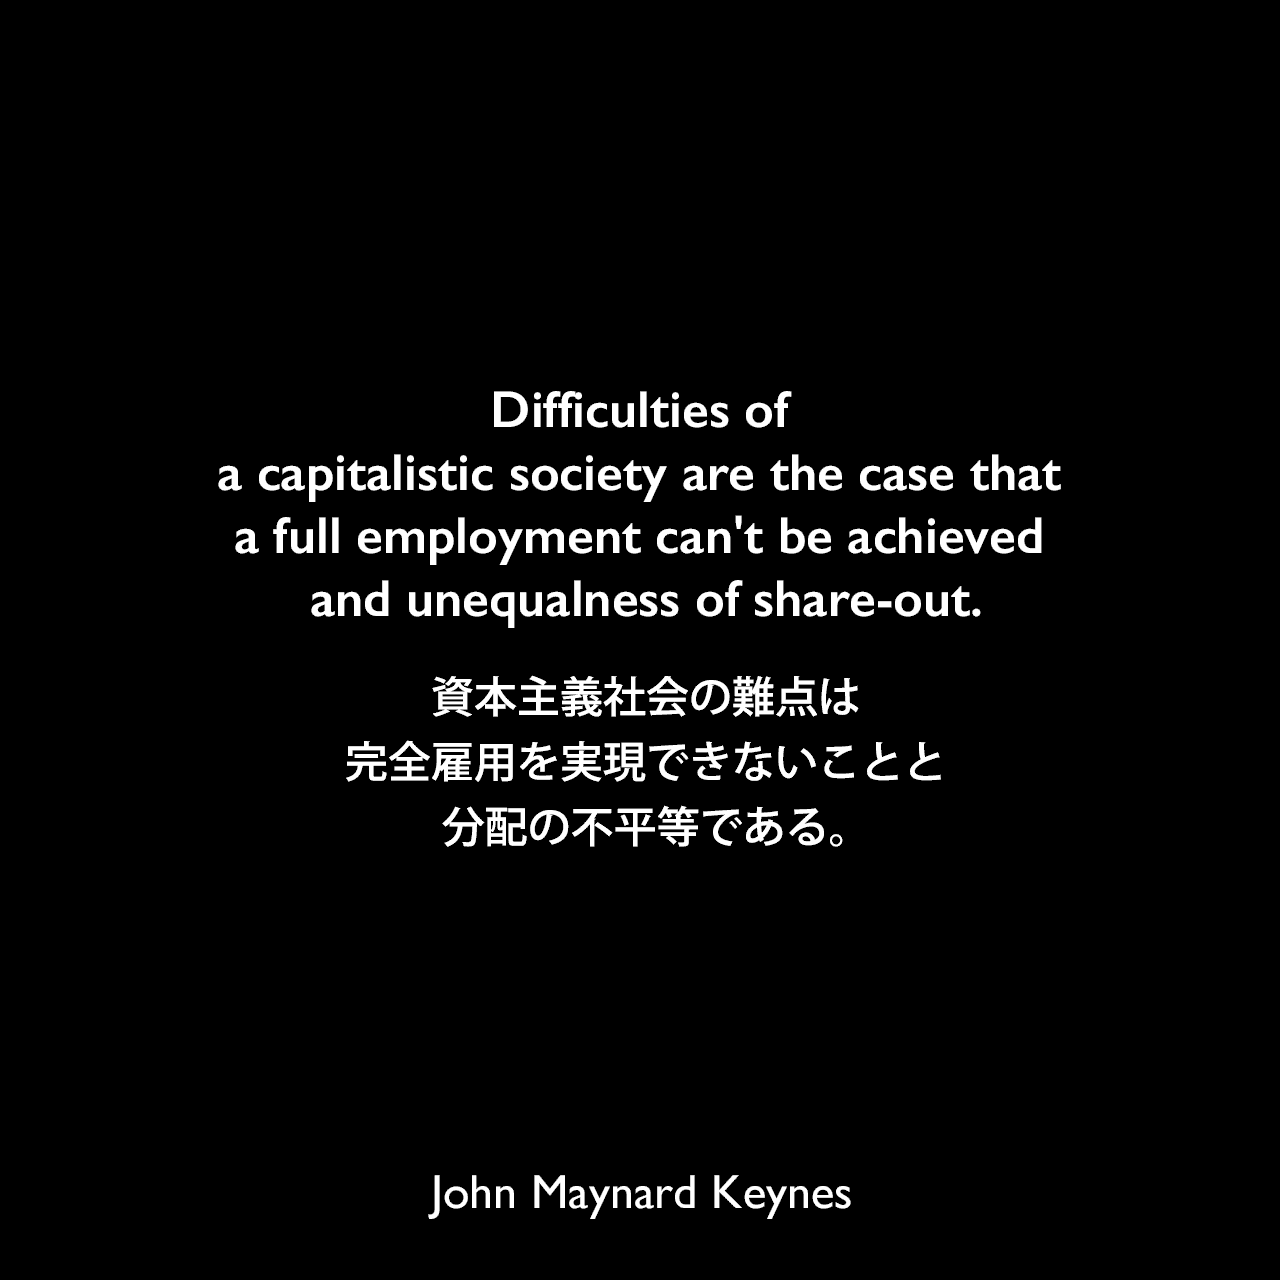 Difficulties of a capitalistic society are the case that a full employment can't be achieved and unequalness of share-out.資本主義社会の難点は完全雇用を実現できないことと分配の不平等である。John Maynard Keynes